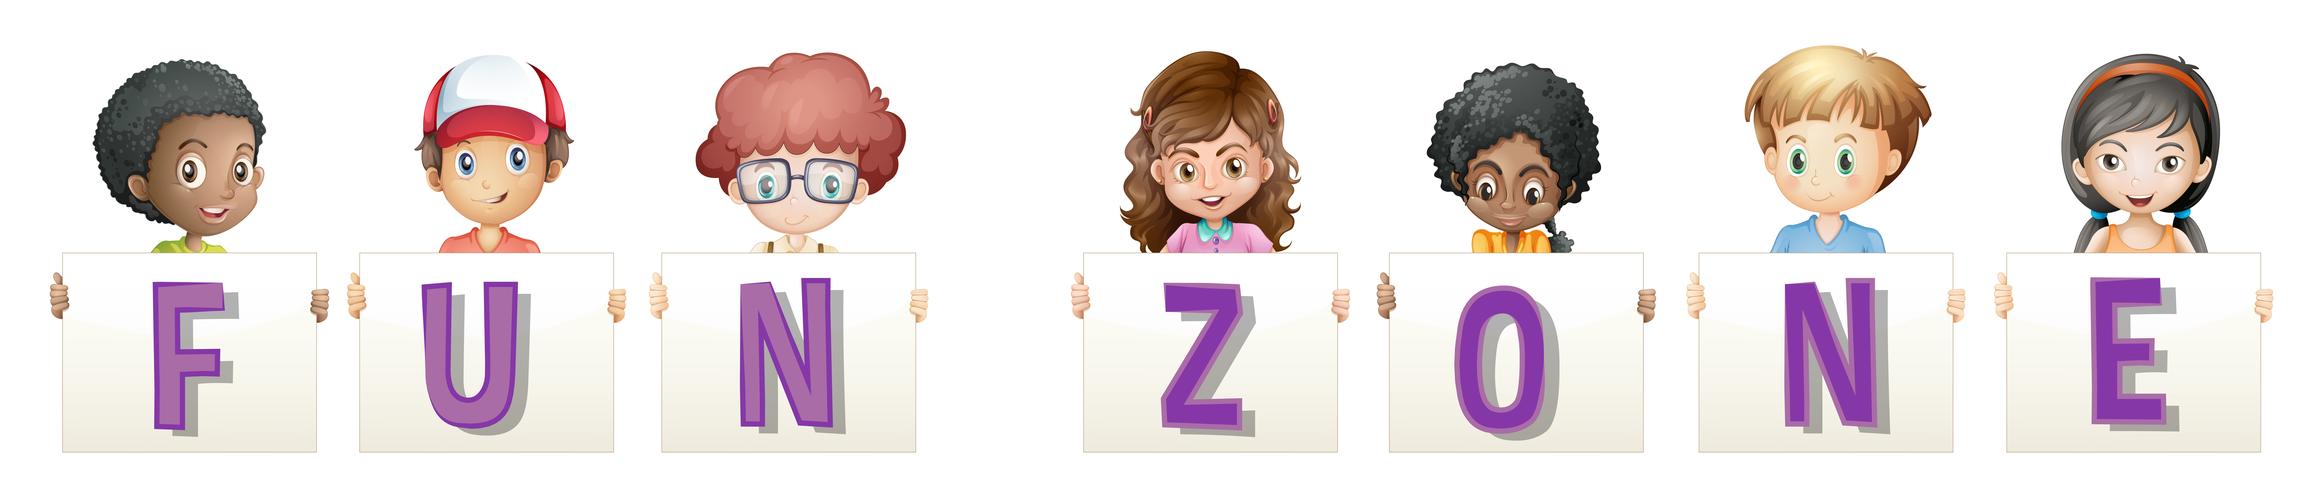 Children holding sign for fun zone vector